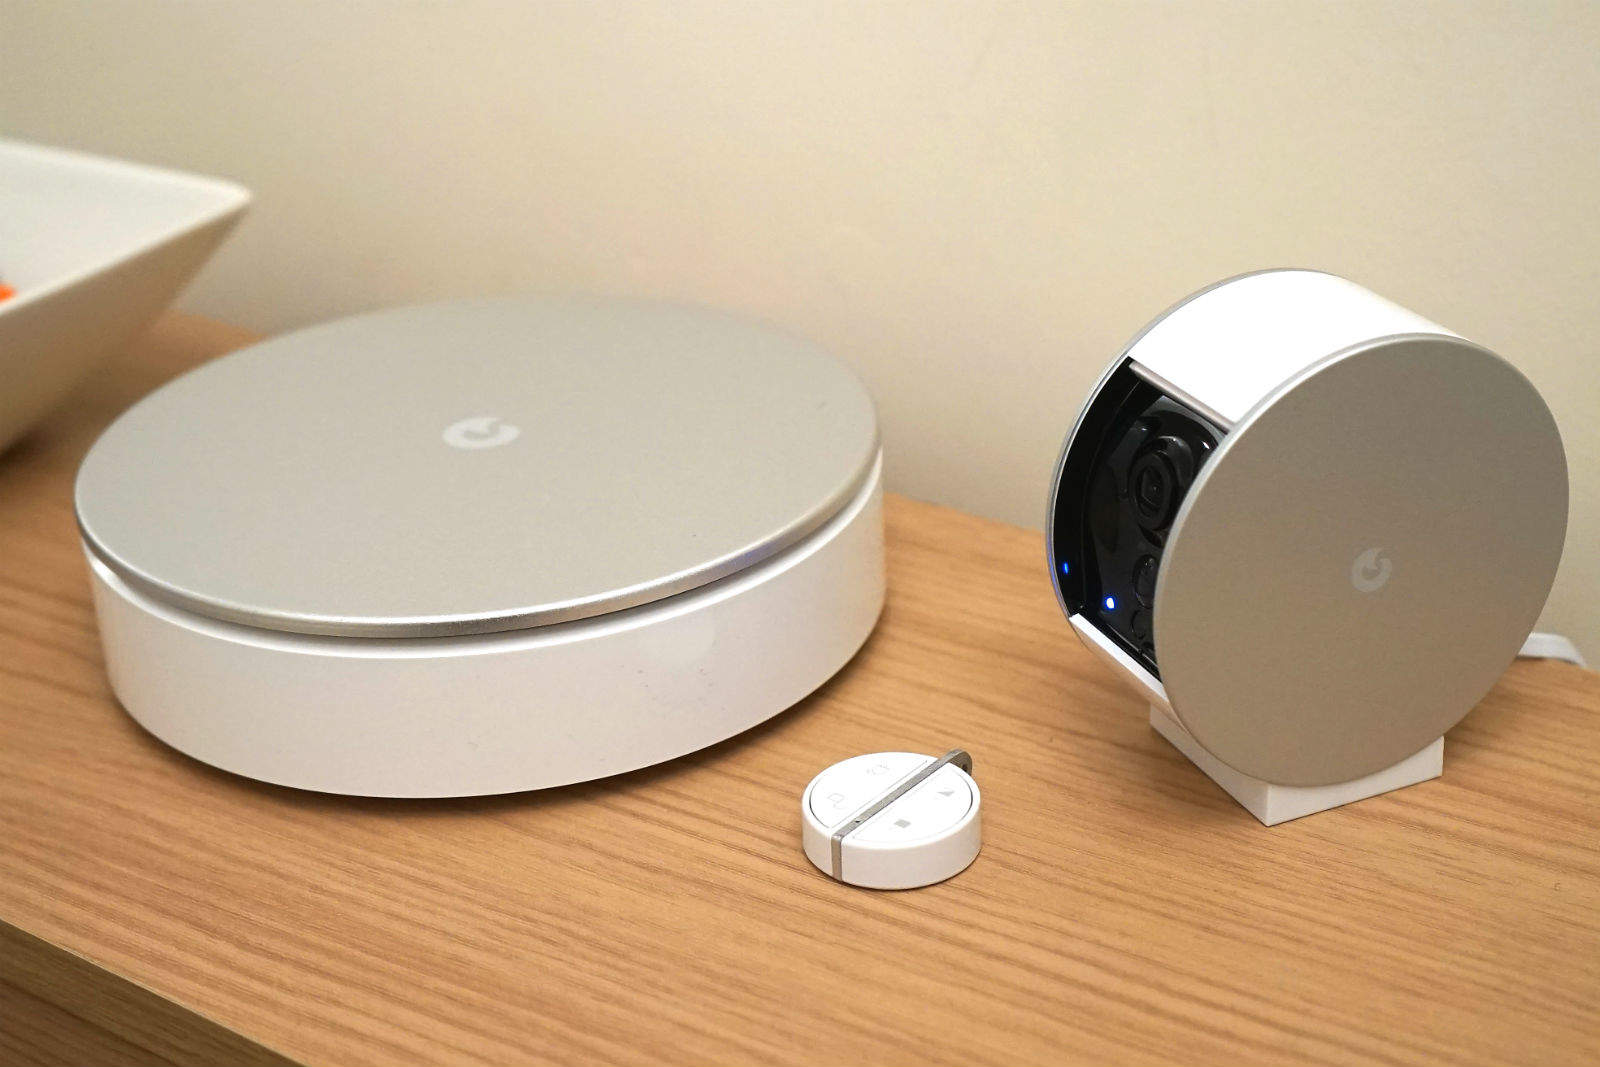 MyFox's wireless home security hardware works well but will cost you a pretty penny.